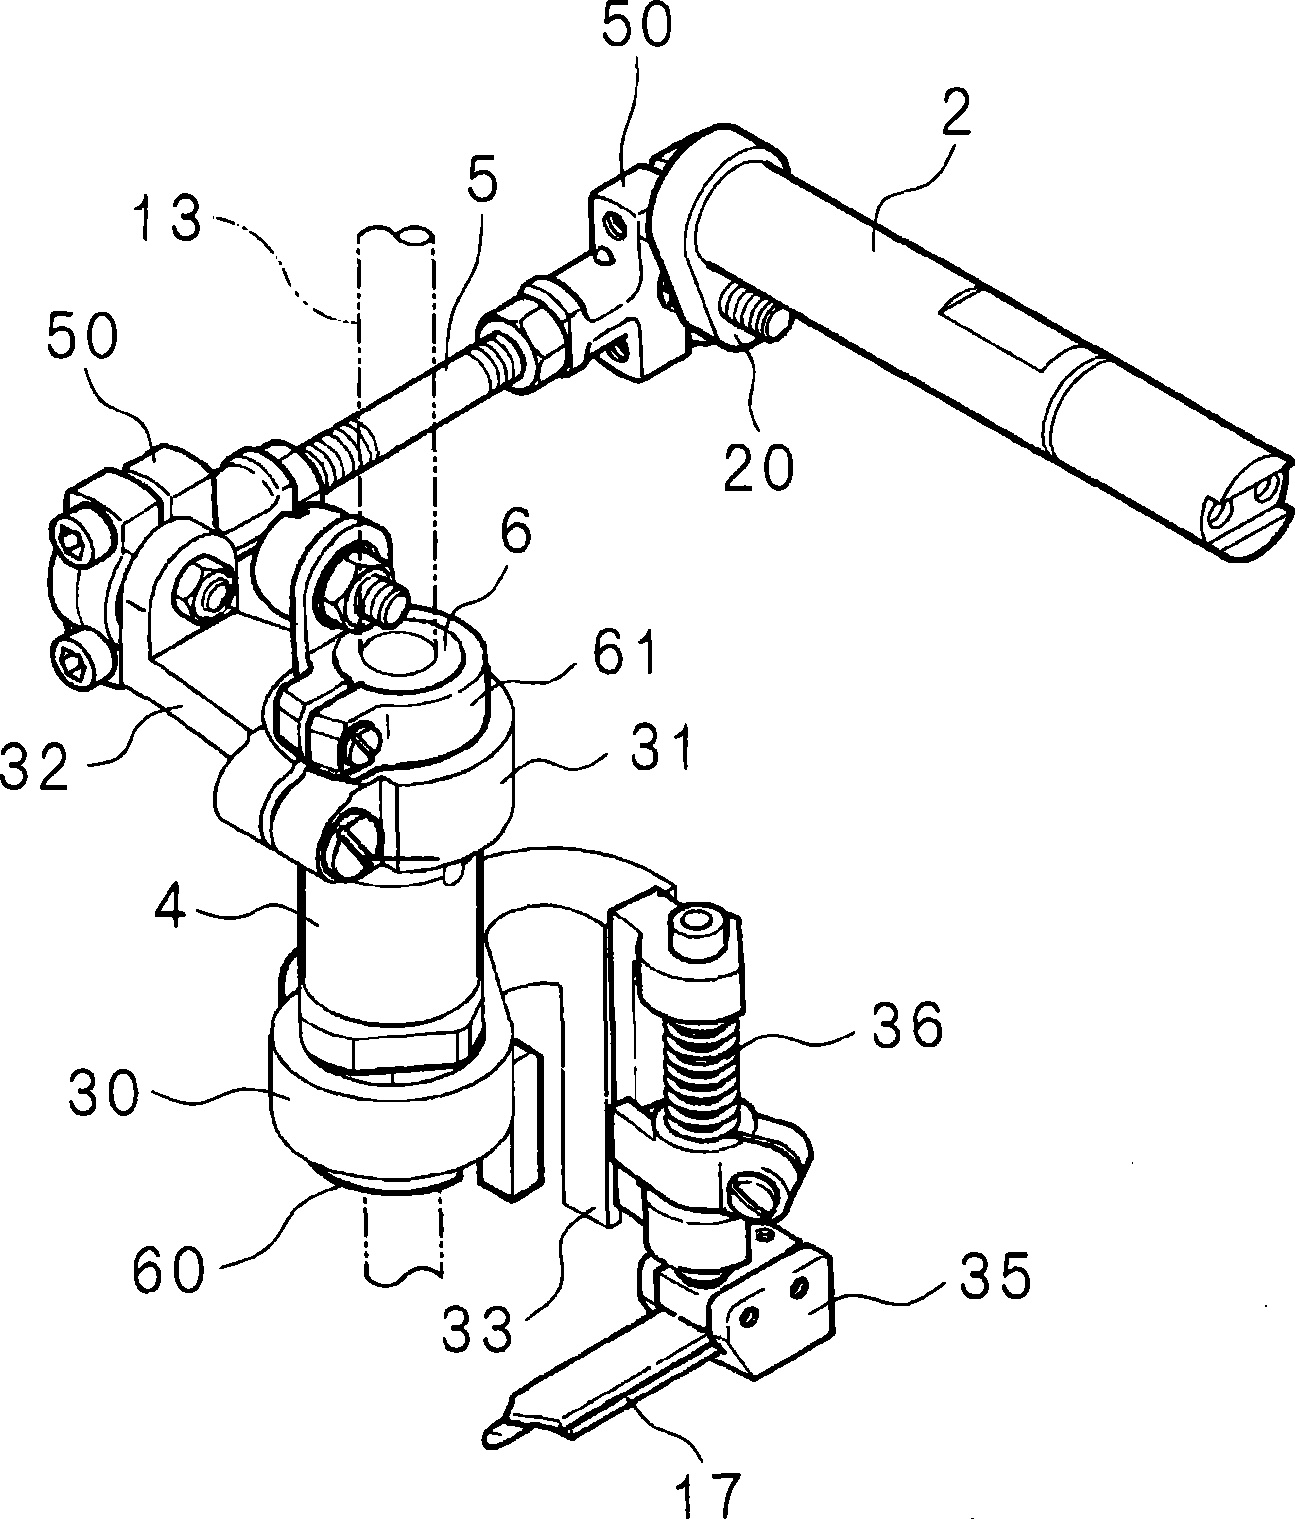 Driving device for cutter of sewing machine